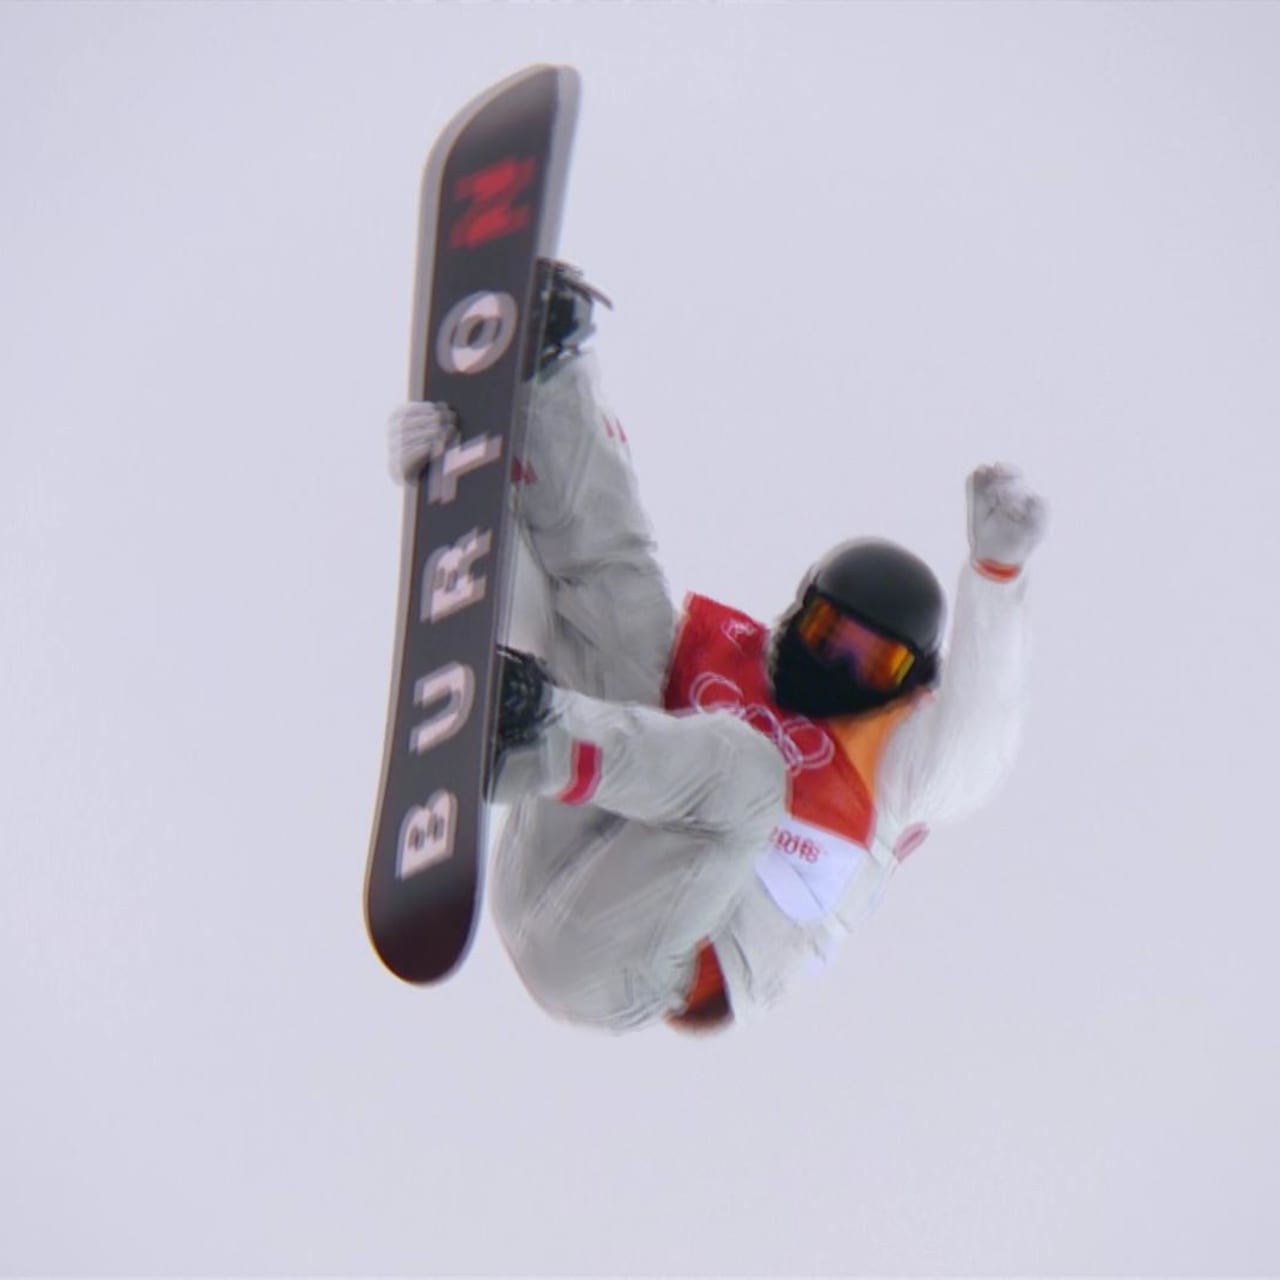 Hear Snowboarder Shaun White Go for the Gold (Record) with His